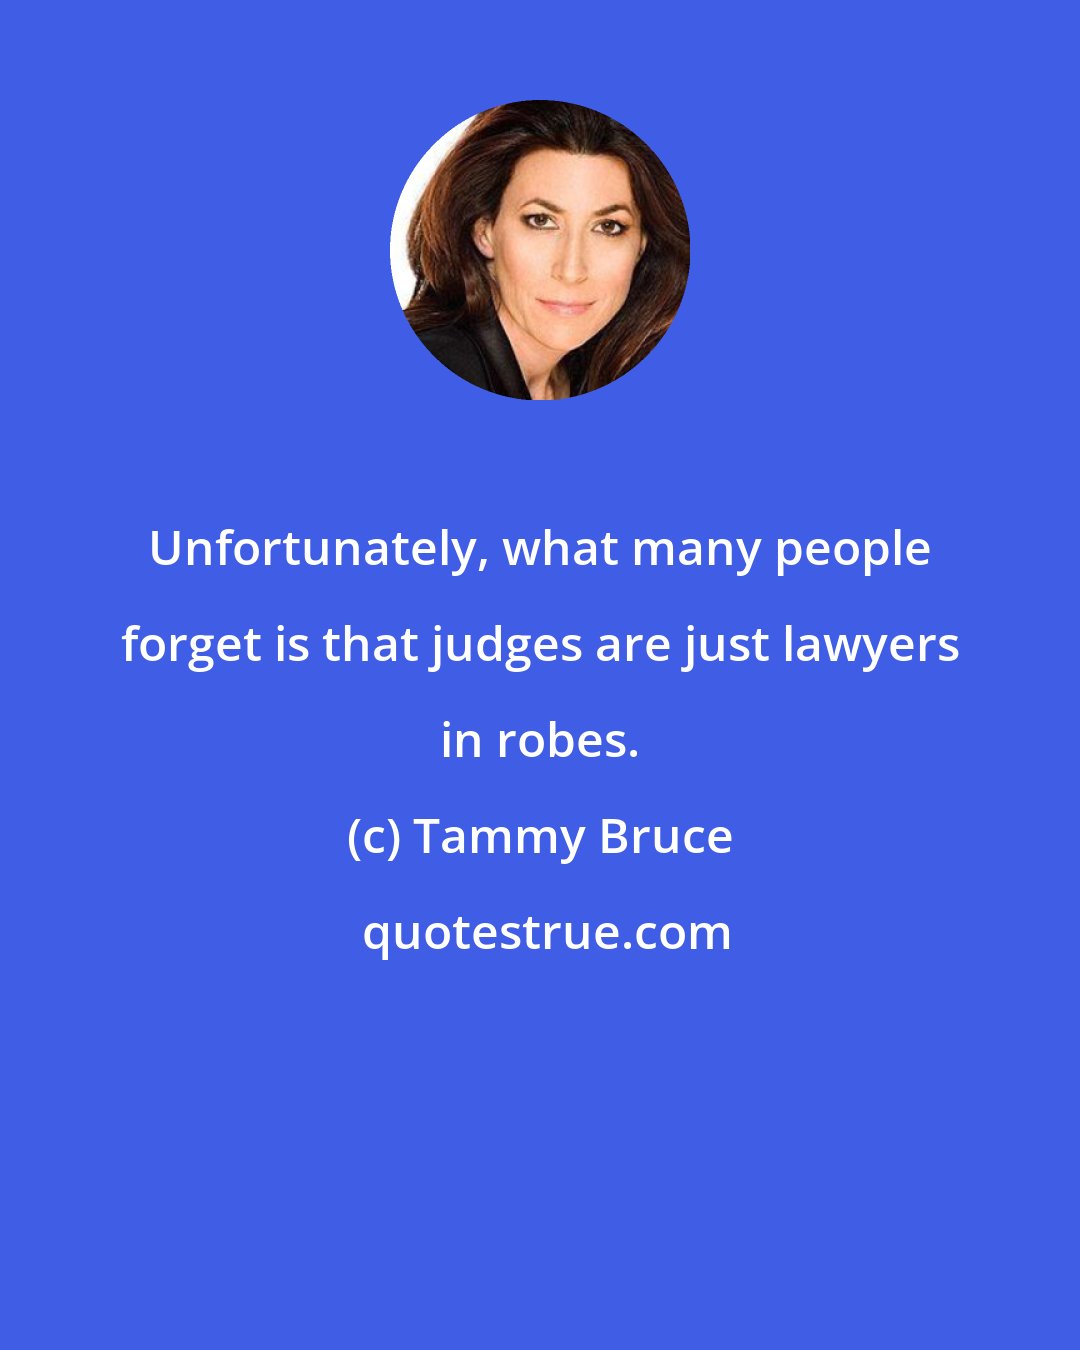 Tammy Bruce: Unfortunately, what many people forget is that judges are just lawyers in robes.